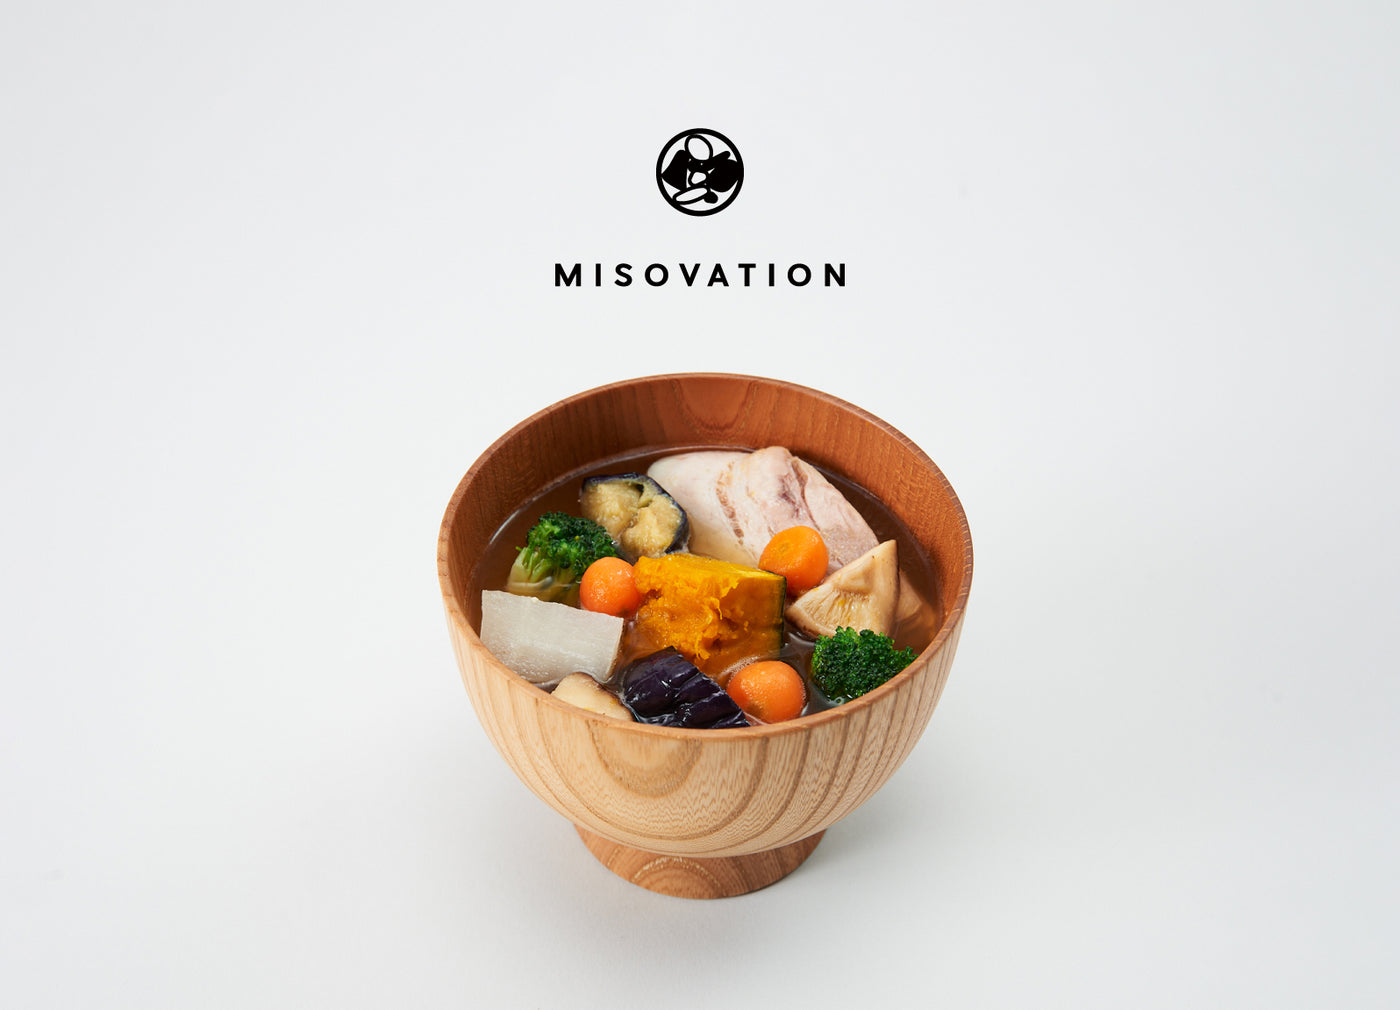 Complete nutrition soup "MISOVATION" with 15 kinds of ingredients